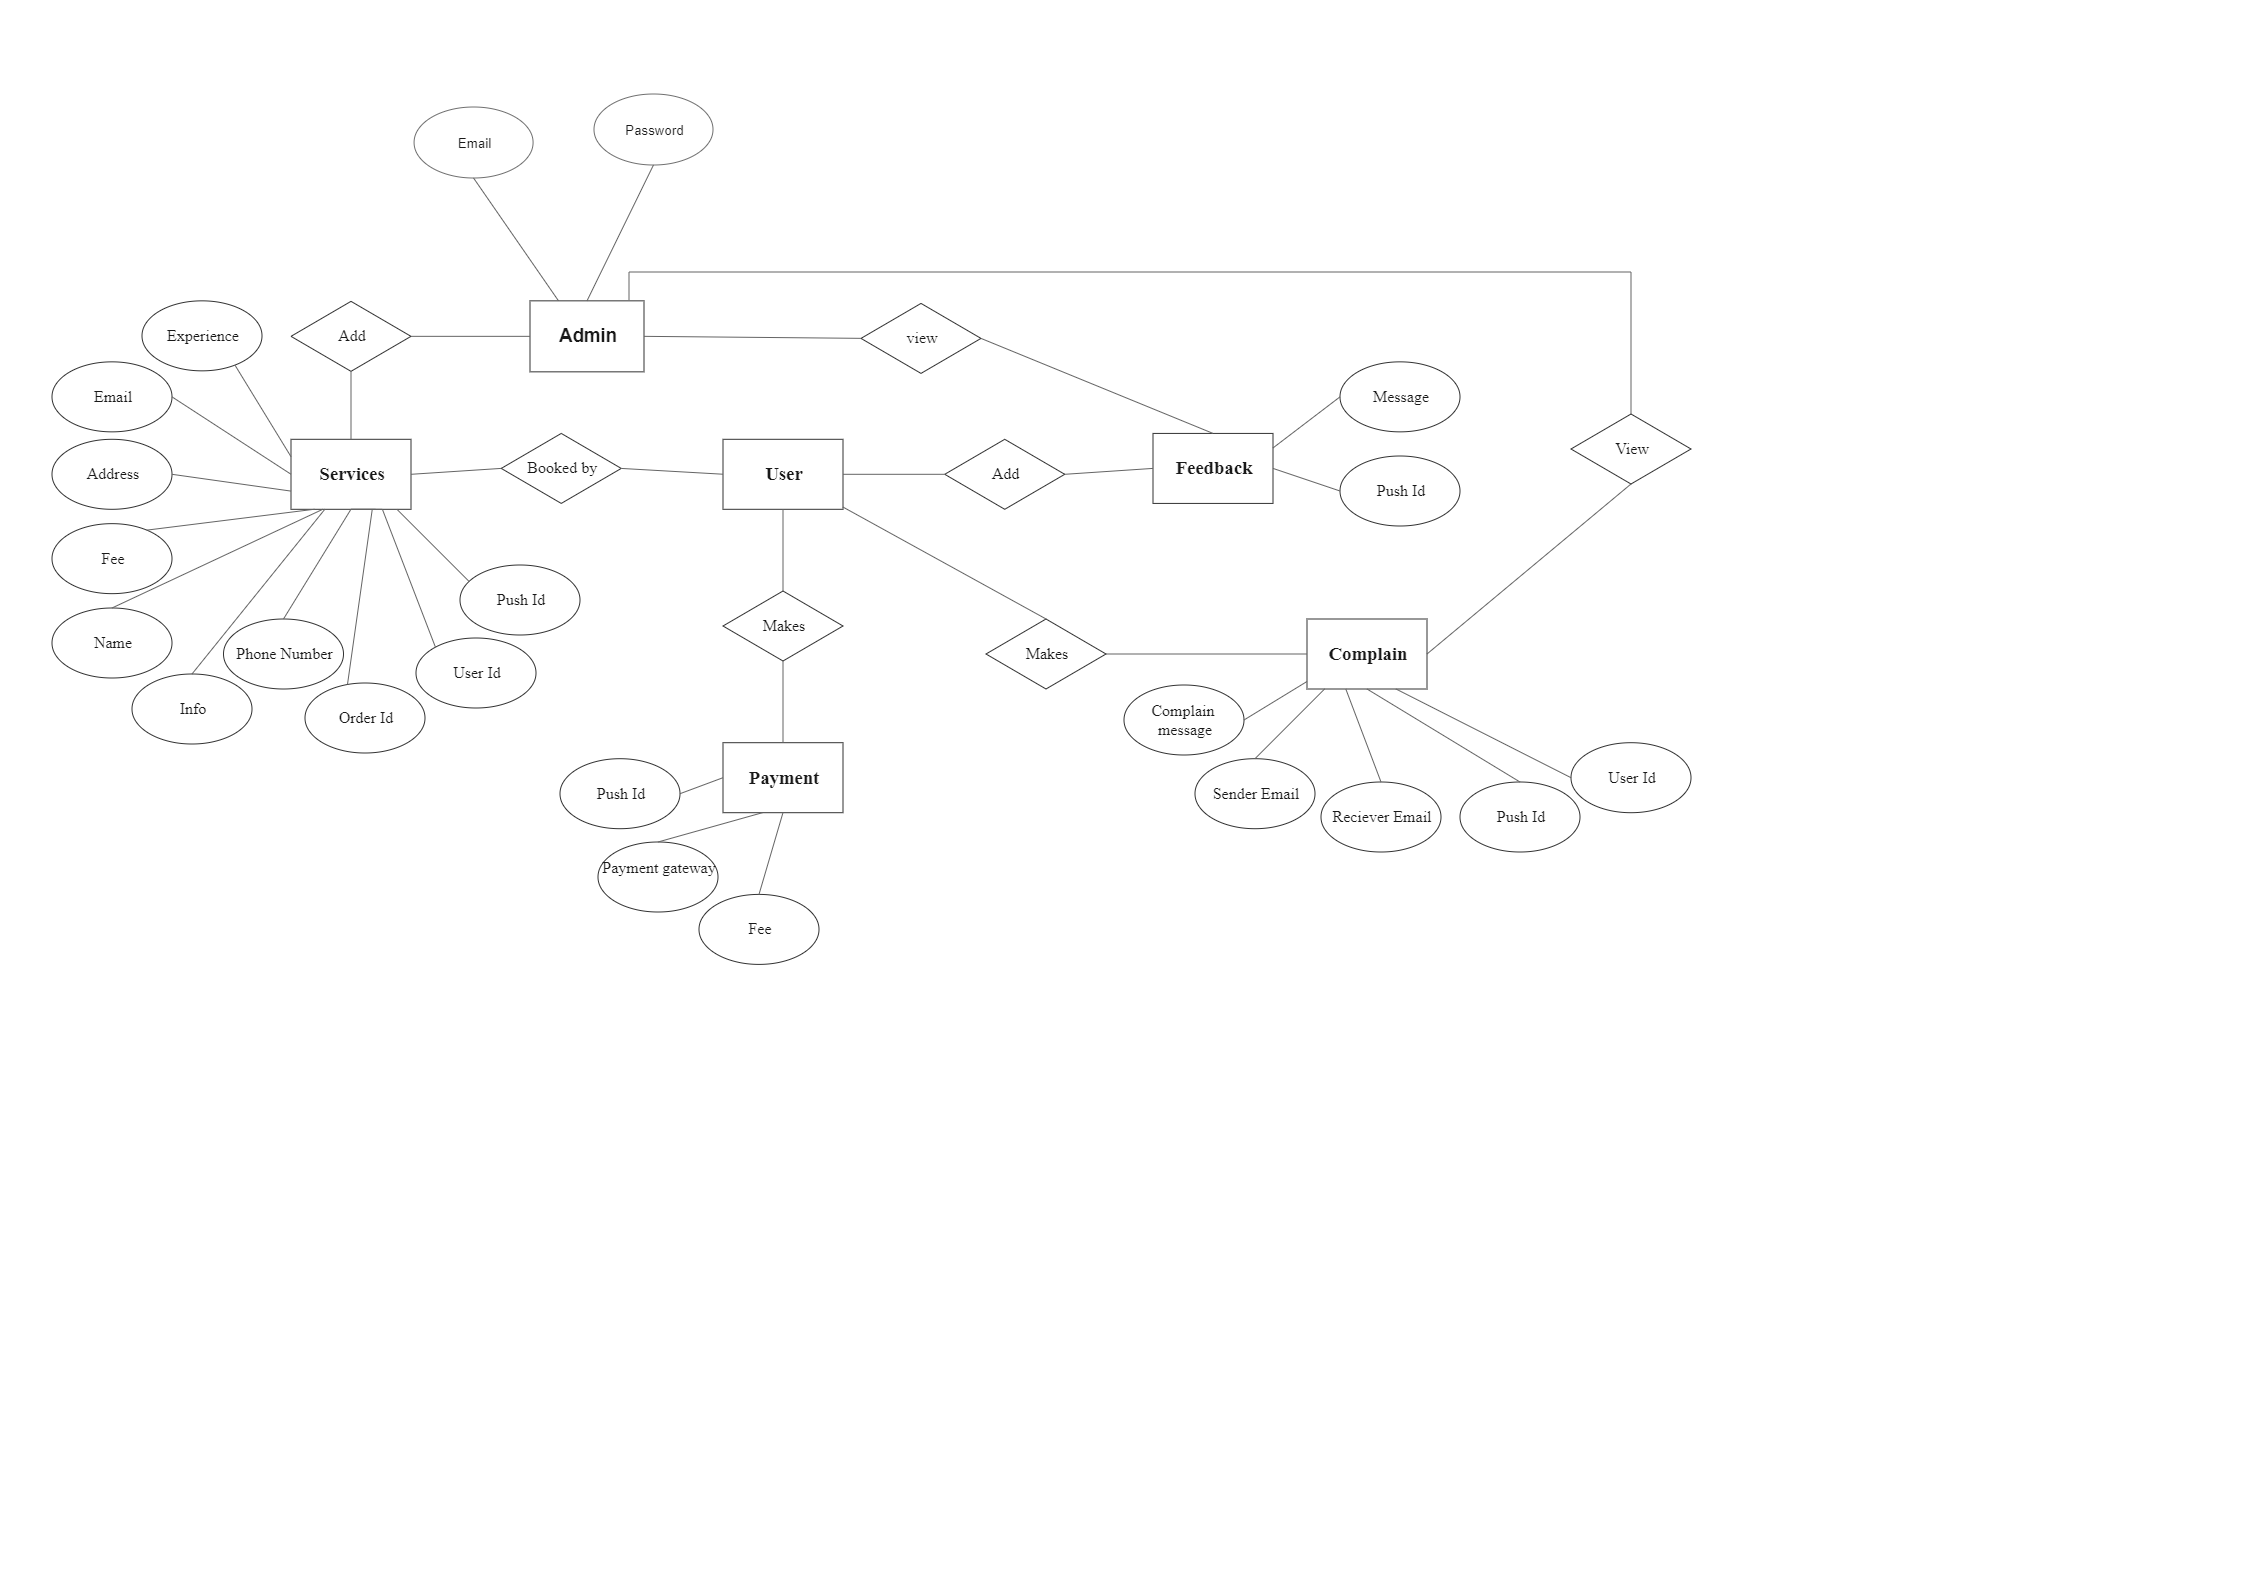 In the Online Business ER Diagram below, we see the entities like User, Services, Feedback, Complaint, Payment, and Admin. As shown below, an online business entity-relationship diagram (ERD) shows the relationships of entity sets stored in a database. An